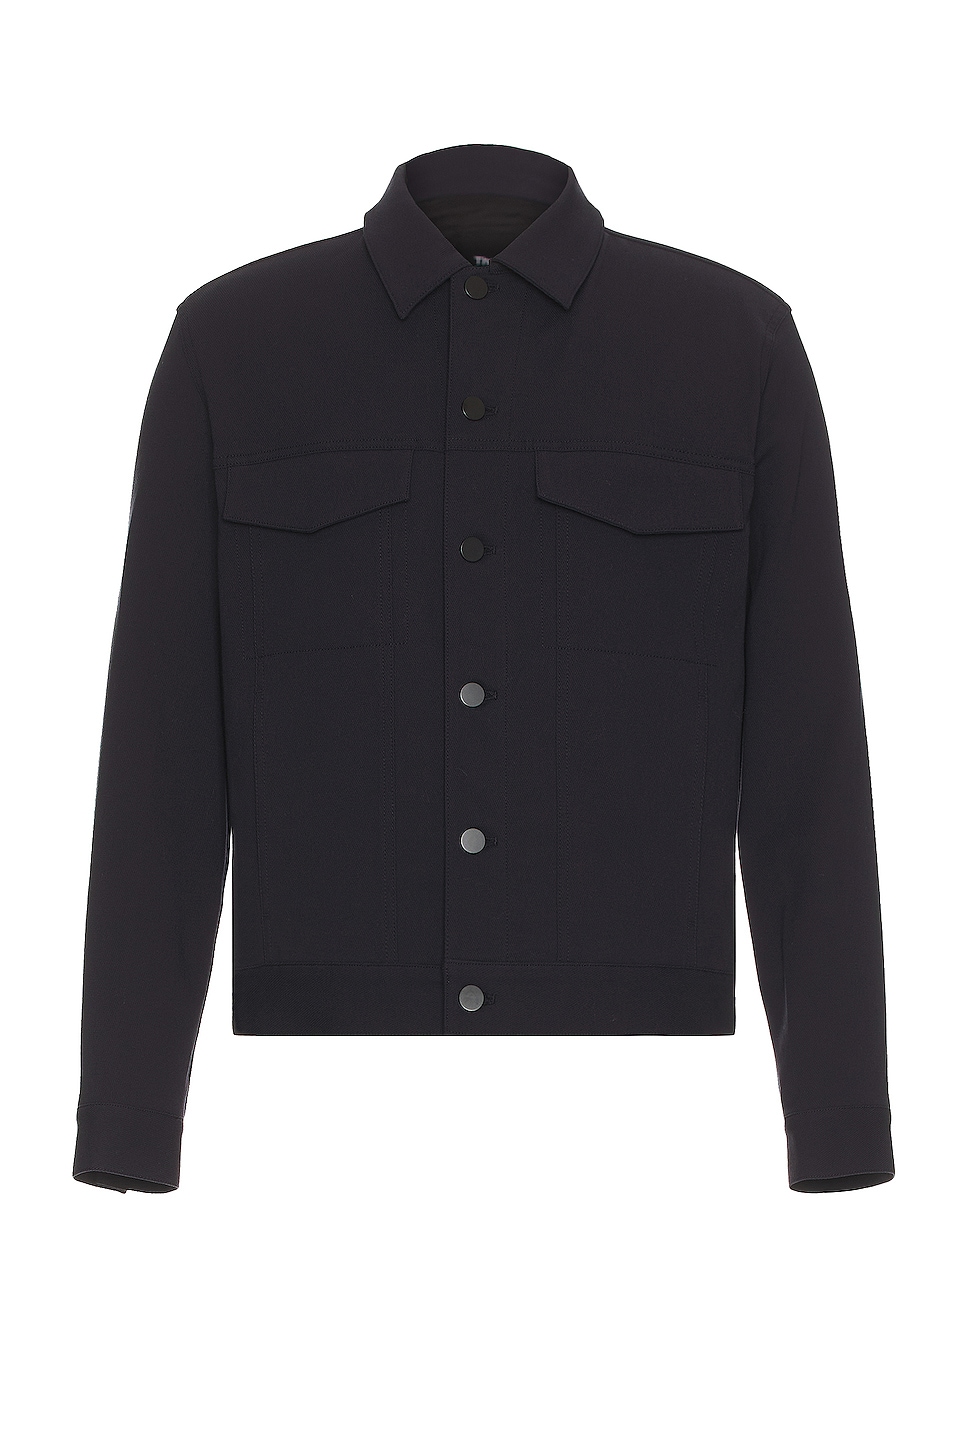 Theory River Neoteric Twill Jacket in DARK NAVY | FWRD